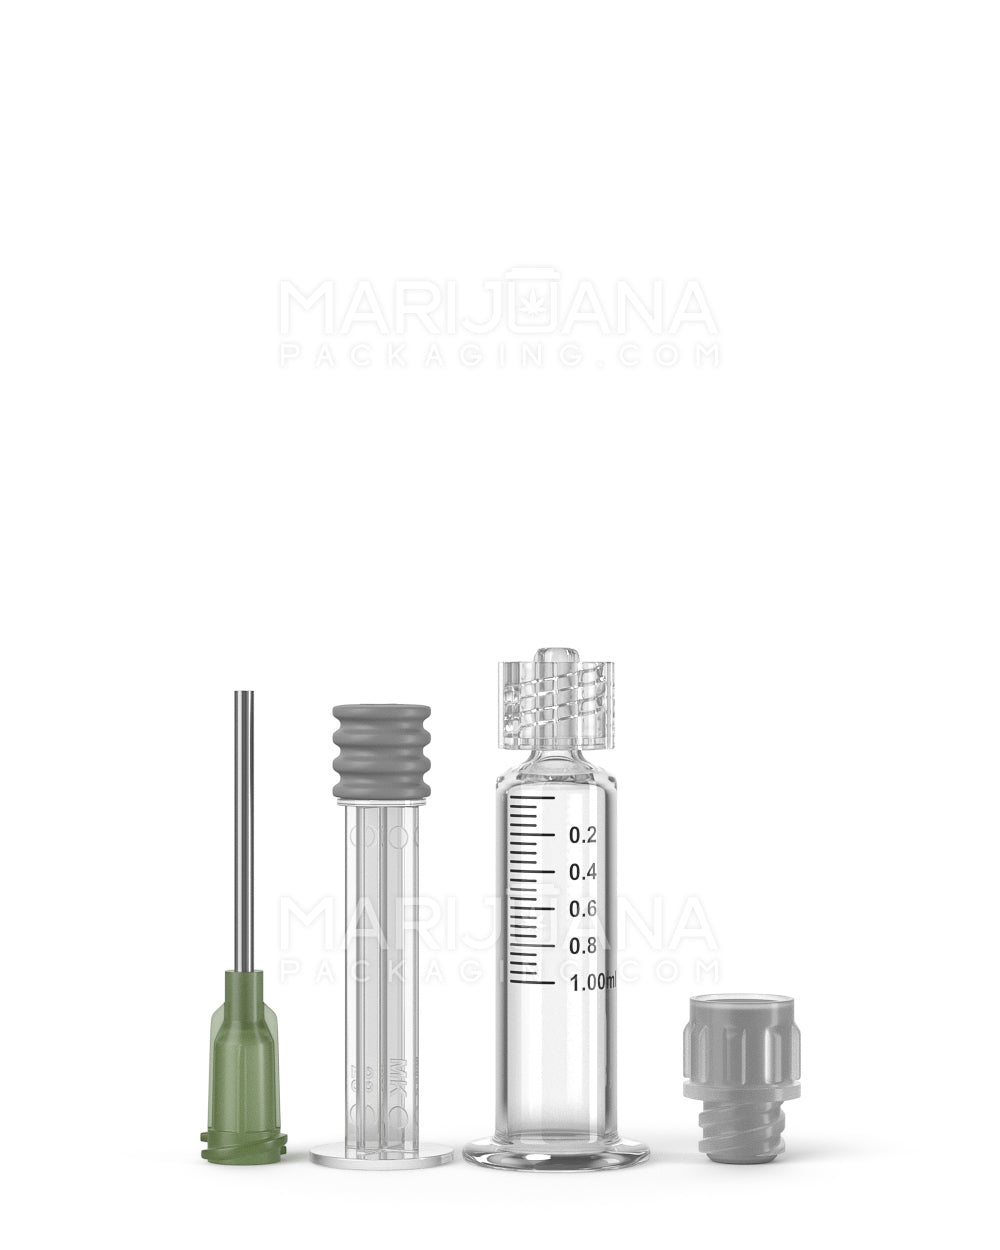 Luer Lock | Glass Dab Applicator Syringes w/ Needle Tip | 1mL - 0.2mL Increments - 100 Count - 3